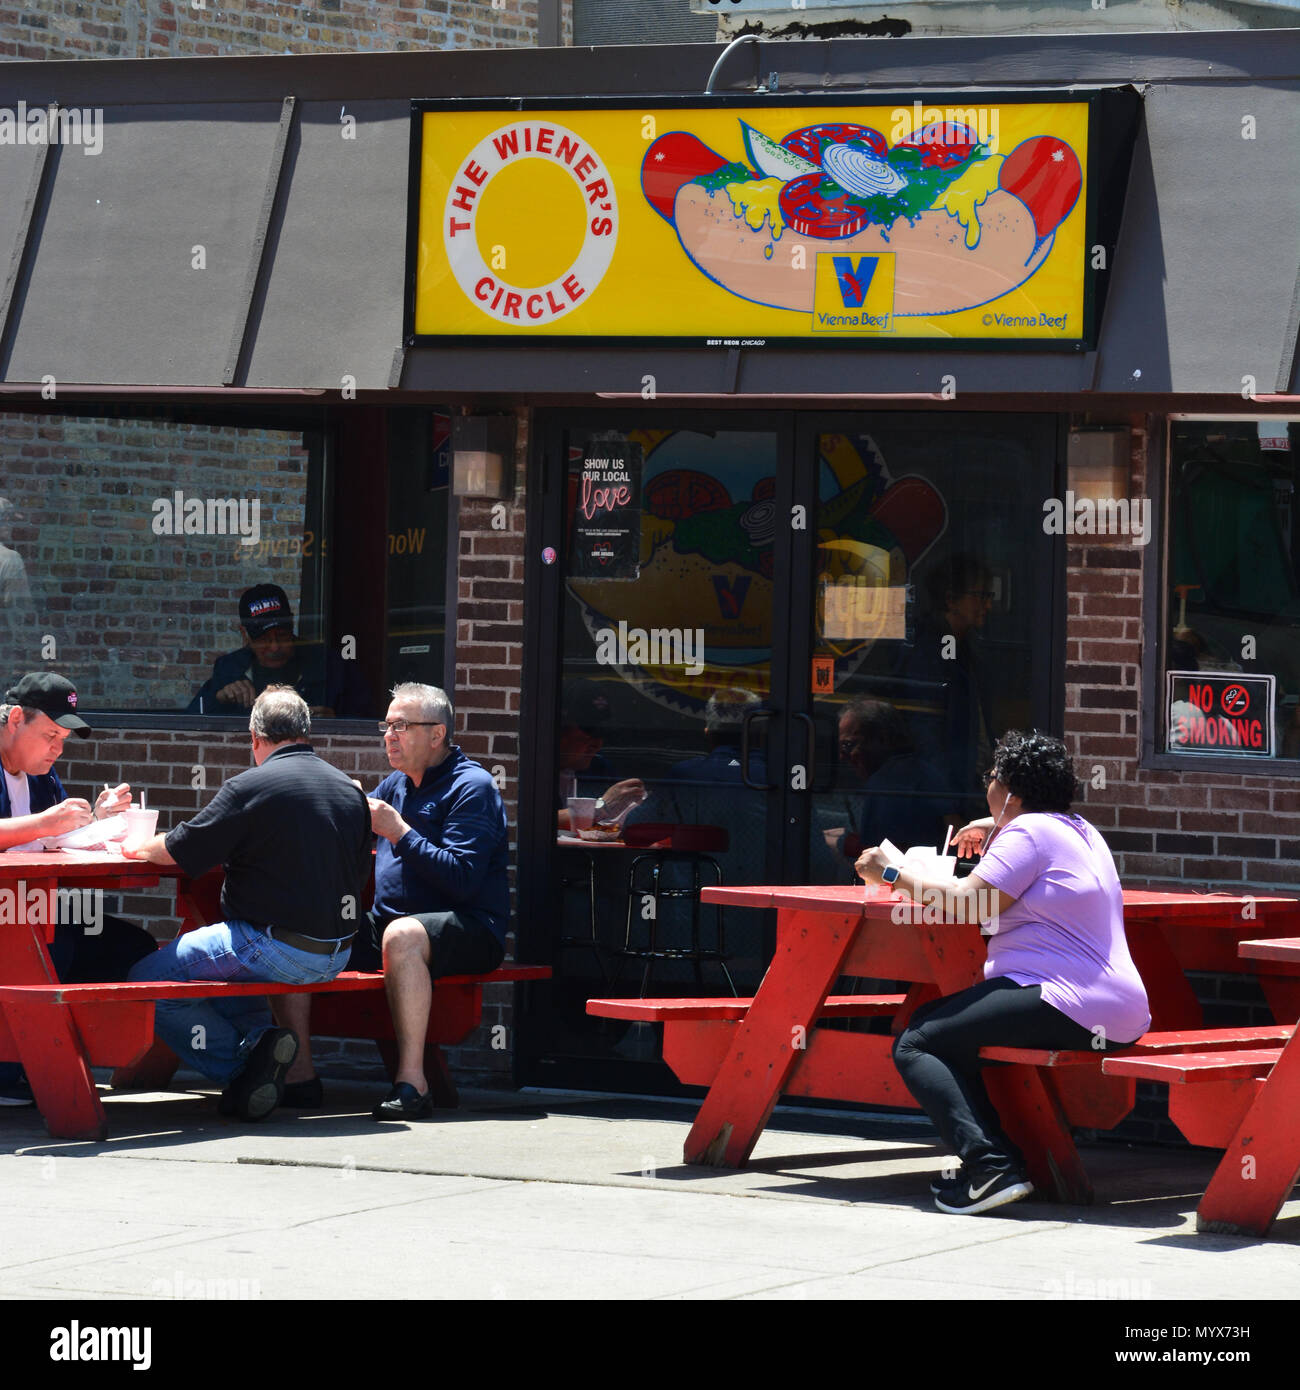 People enjoy Chicago style hotdogs at sidewalk picnic tables outside The Wieners Circle, where they are famous for dishing out insults with the food. Stock Photo